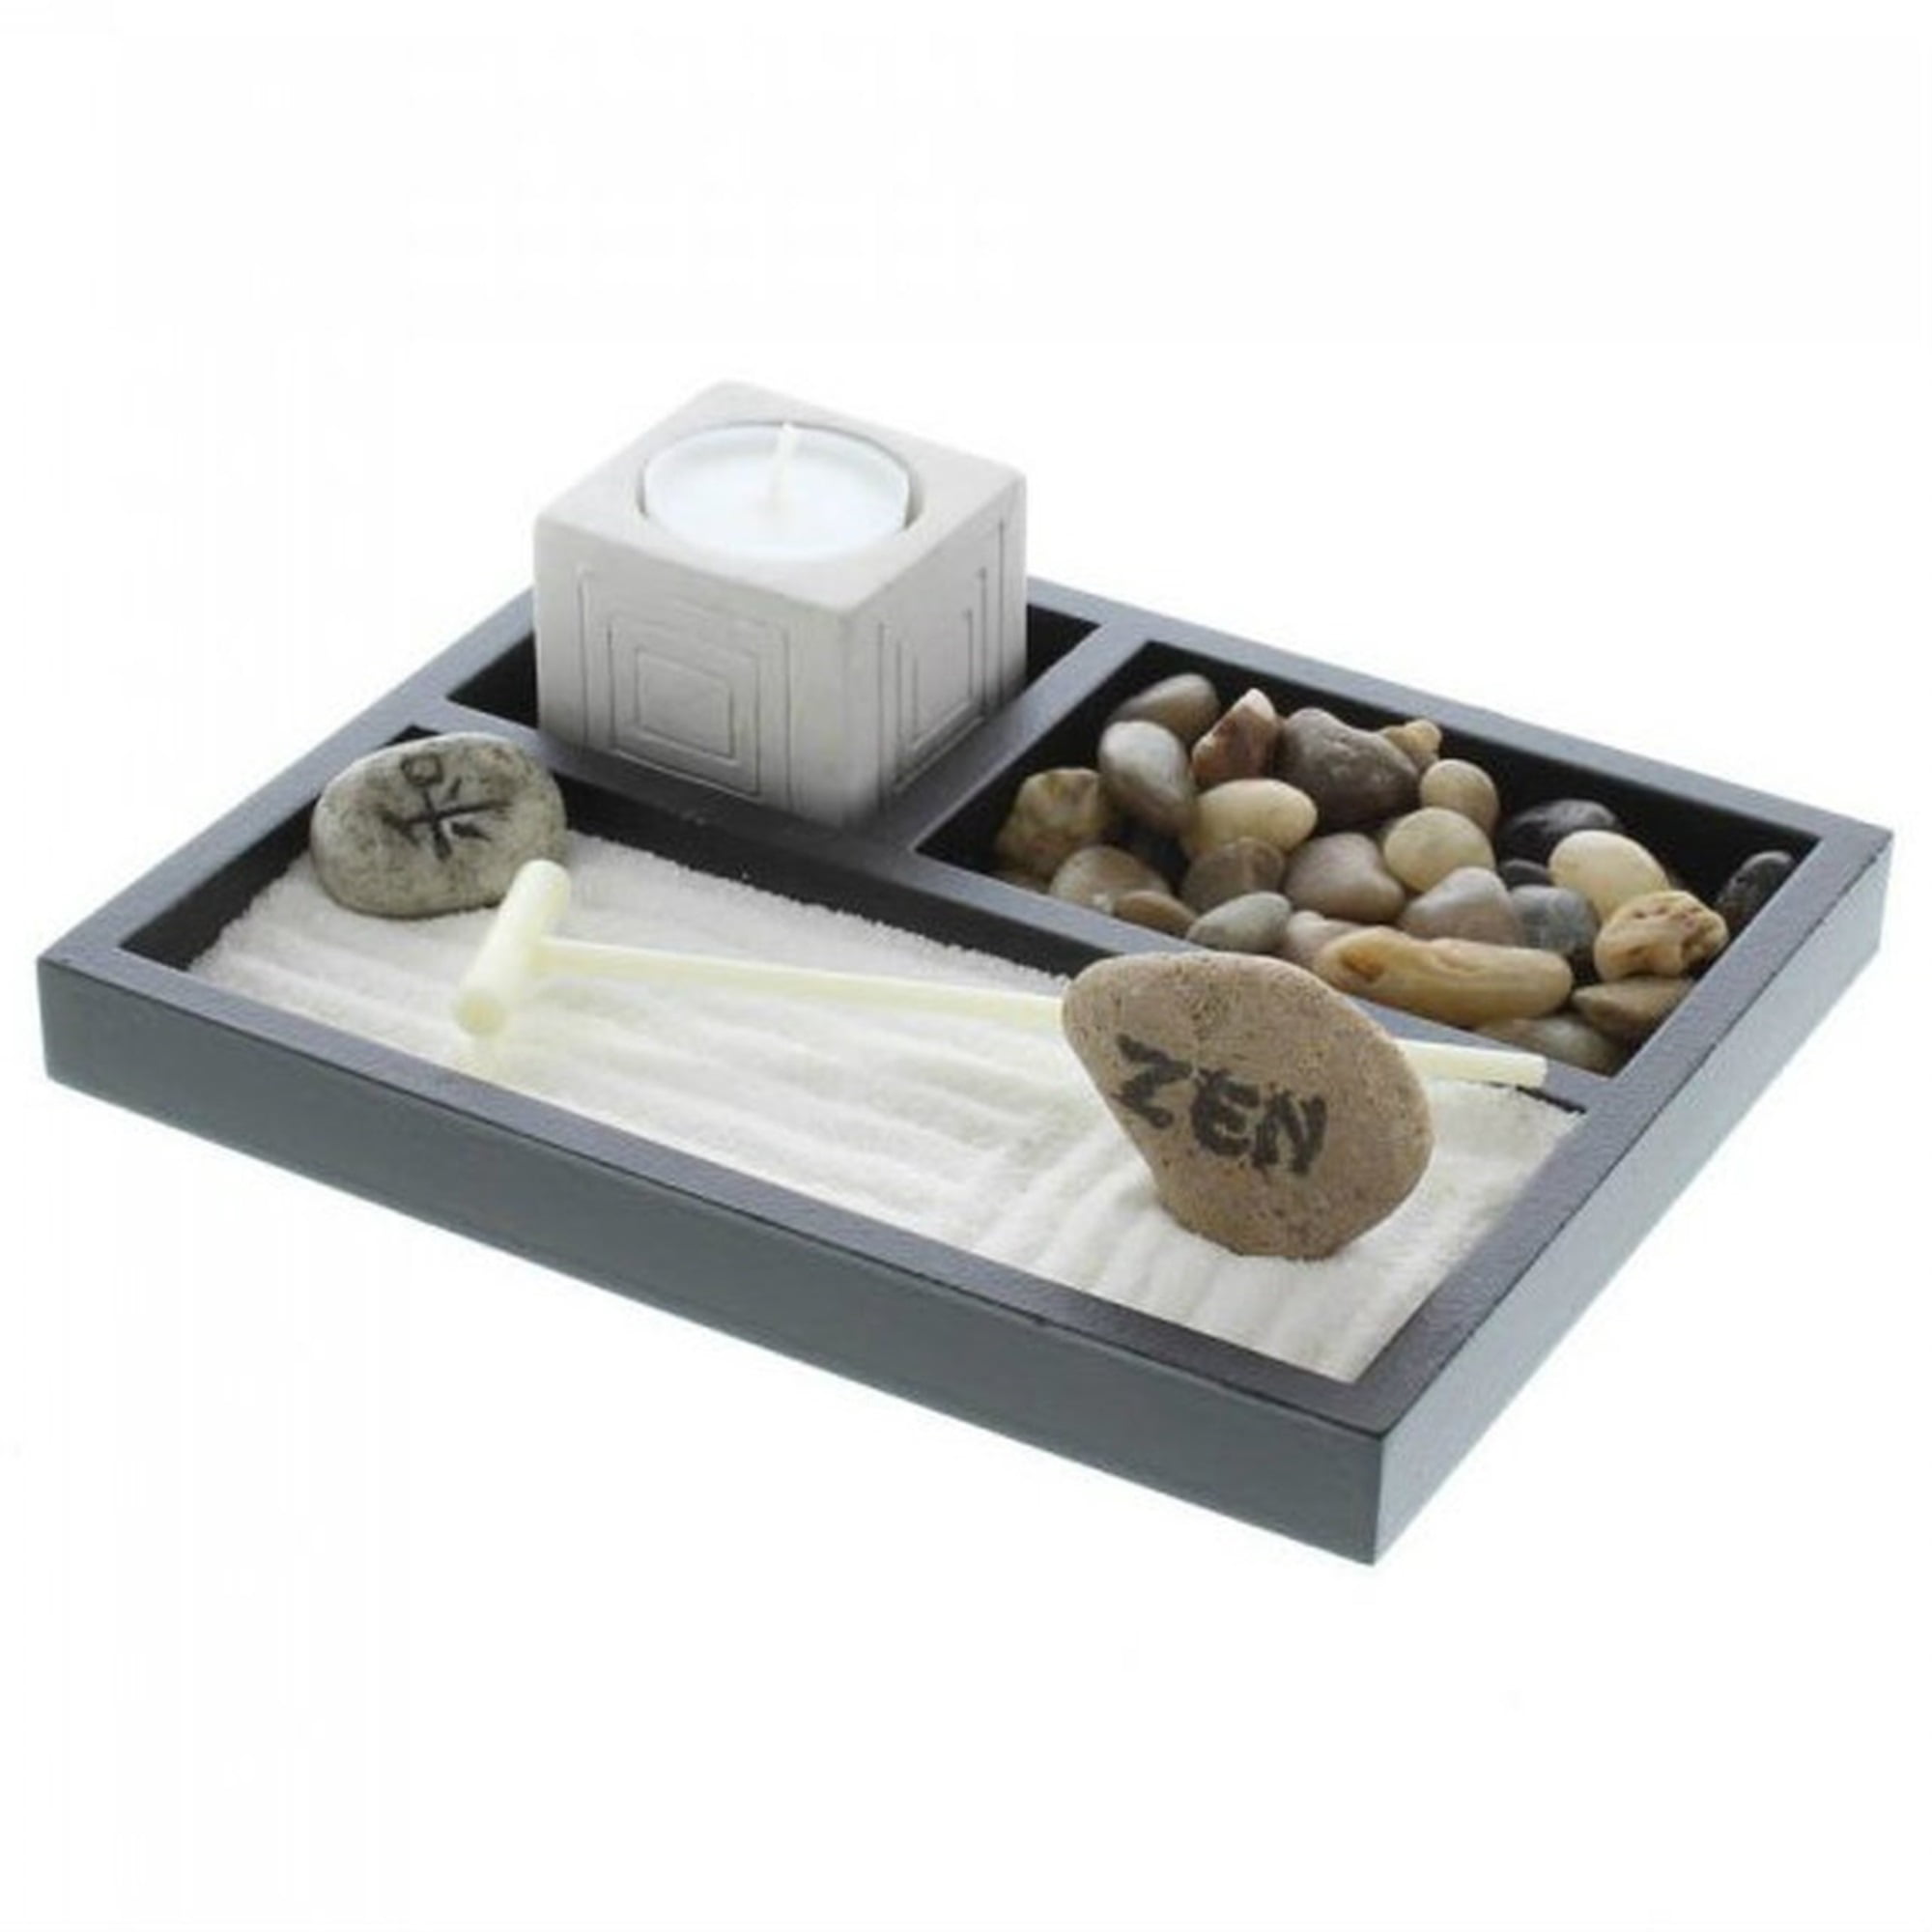 Includes Soul Stone Candle Succulent Candle and Glass Tealight WHW Whole House Worlds Table Top Zen Garden Plus Buddha Gift Set 9 7/8 Inches in Diameter Rocks Mixed Materials